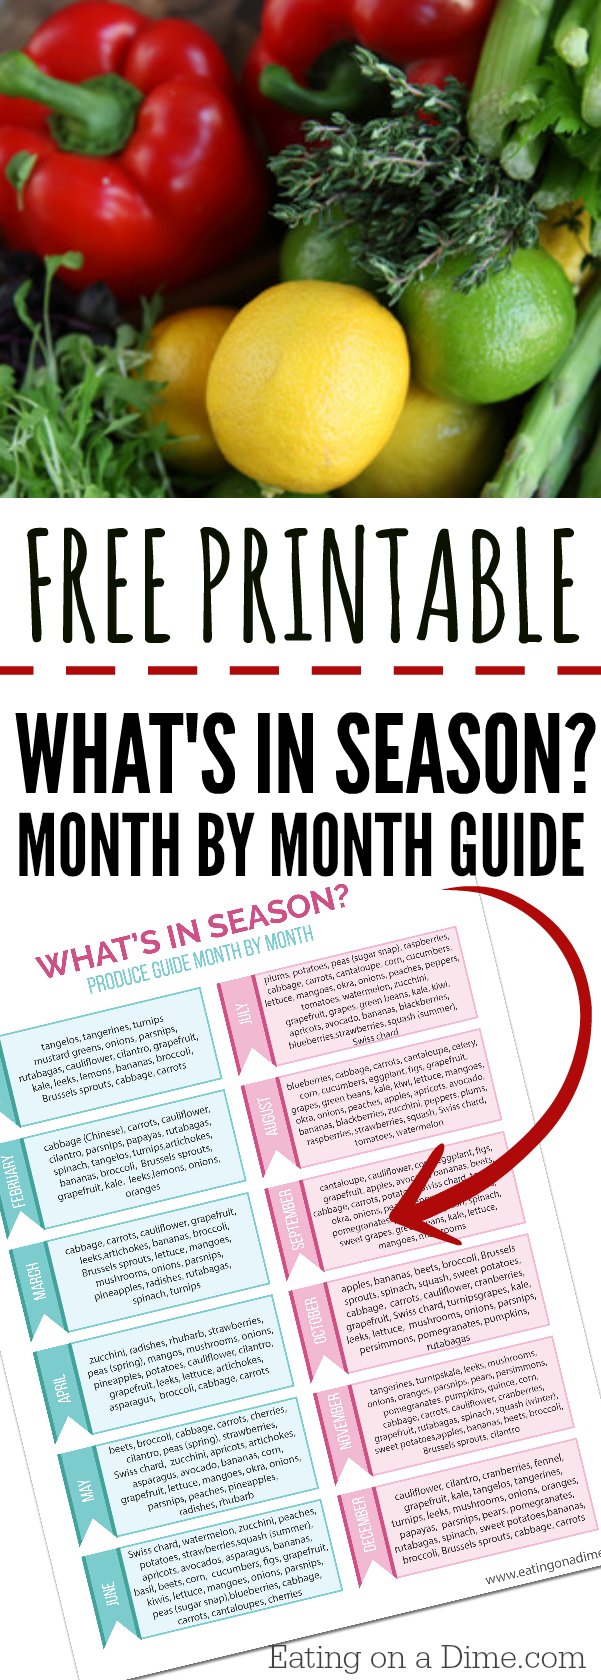 What's in season - A calendar of fruits and vegetables in season. Month by month list of produce in season to help you save money. 